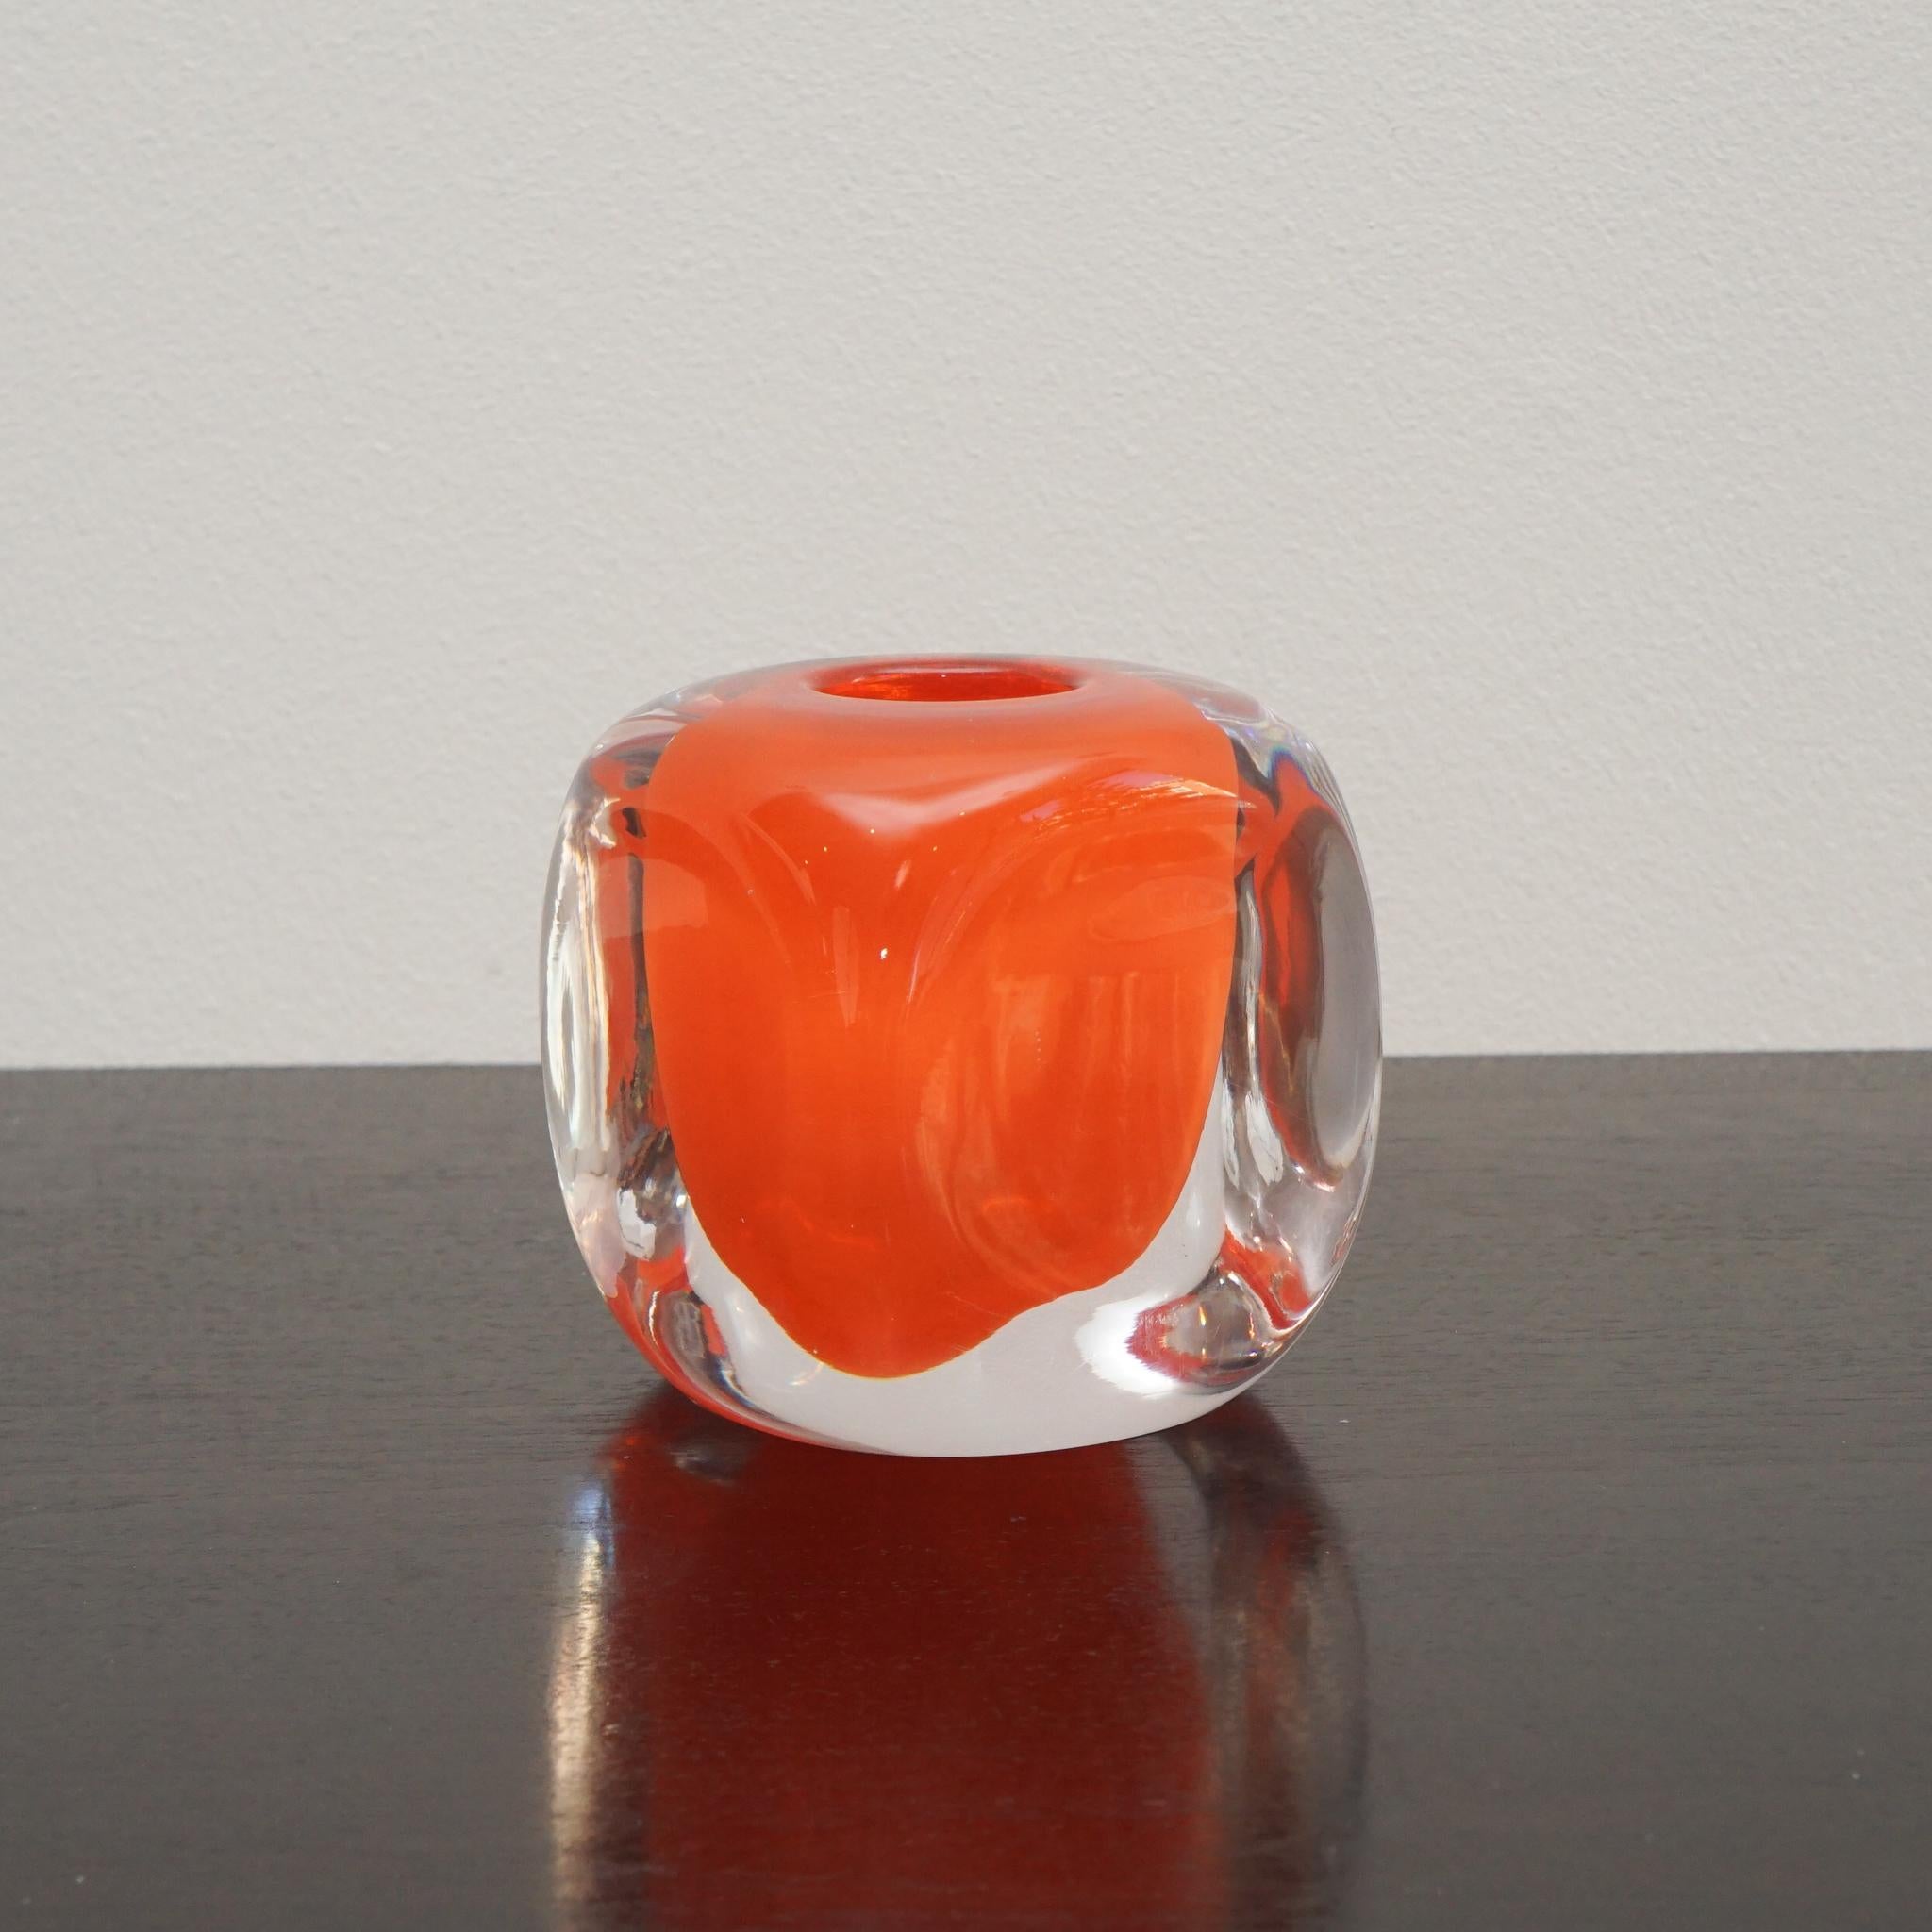 Belgian glass maker Henry Dean has been in the business of creating handmade, mouthblown glass vessels for the past thirty years.  The Tournon orange clear glass candle holder, shown here, reveals the artistry for which the company is known.  